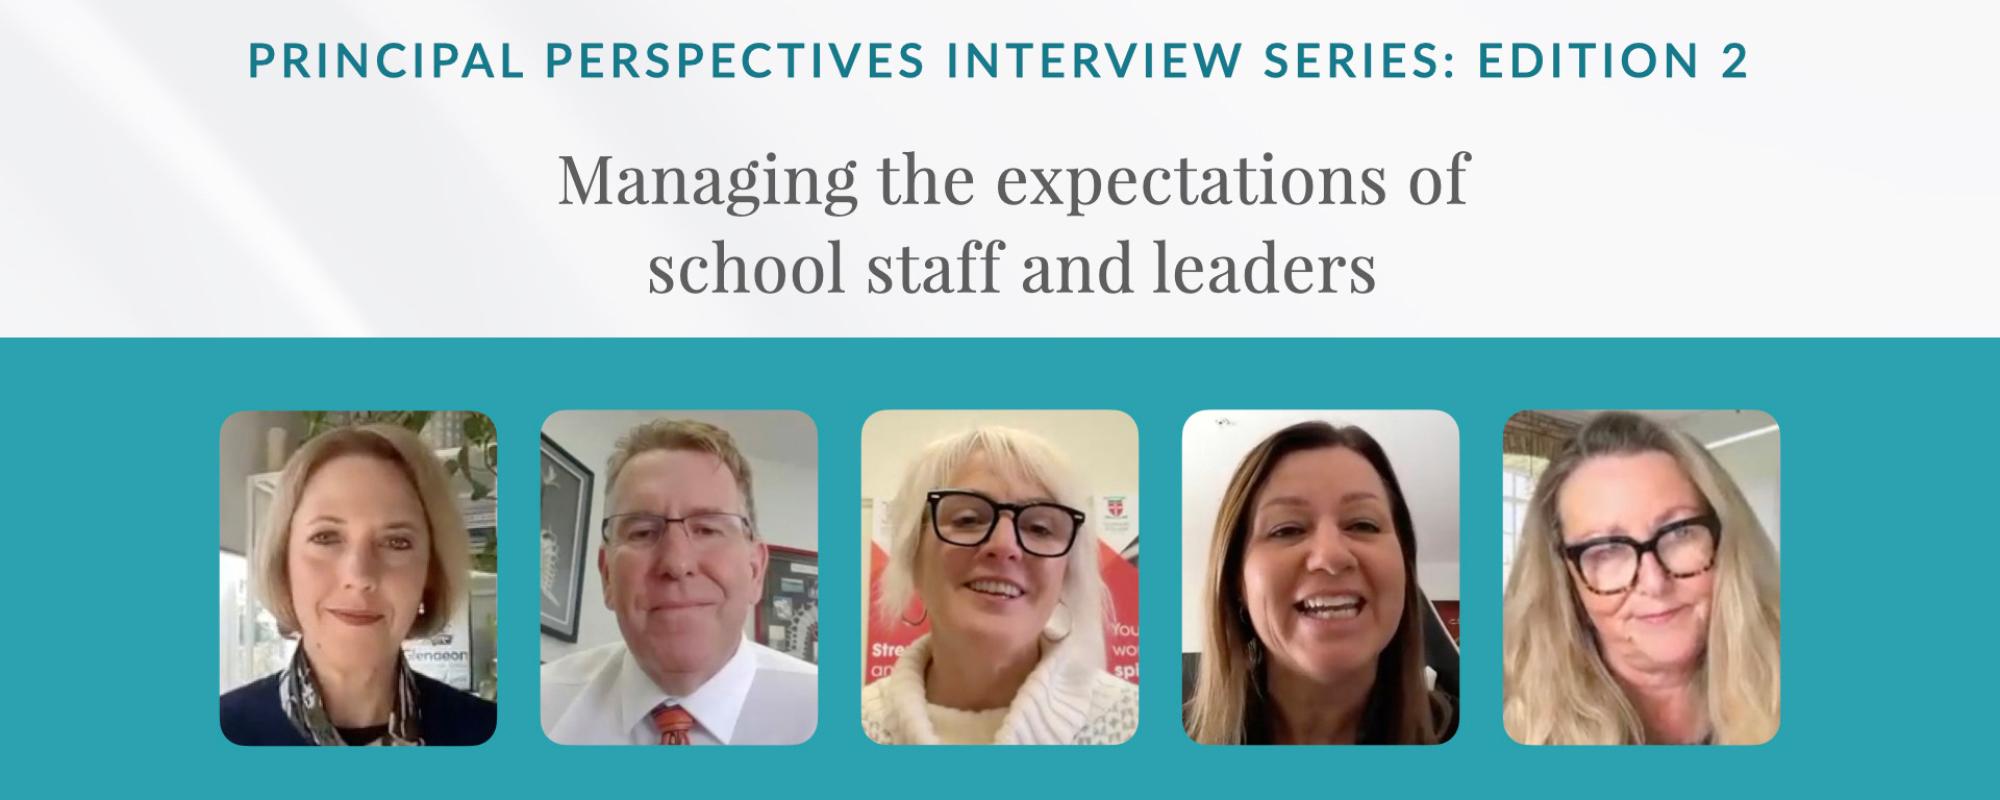 Principal Perspectives Interview Series: Edition 2